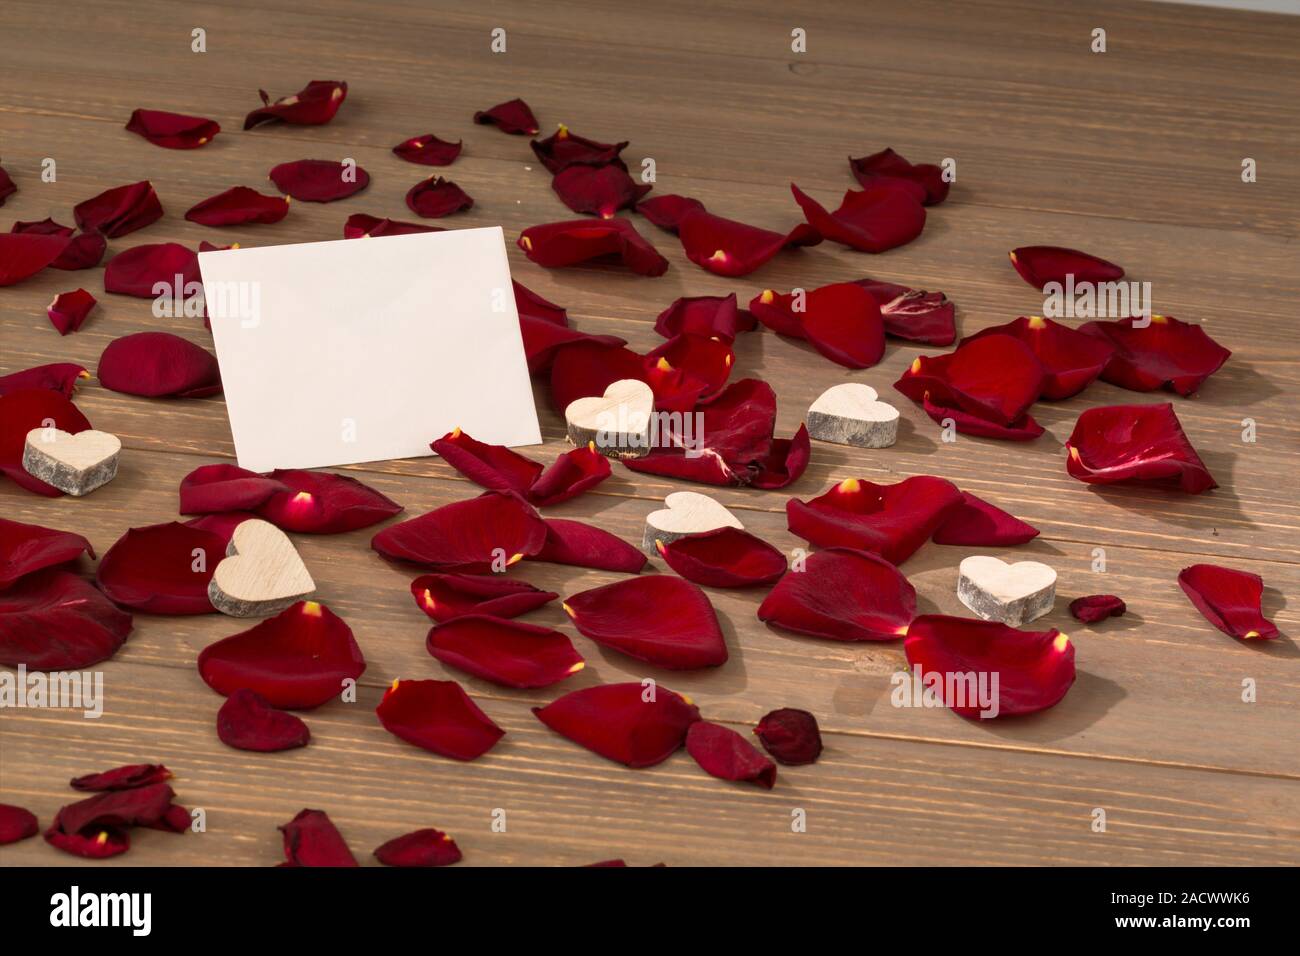 Roses for Valentine's Day and Mother's Day Stock Photo